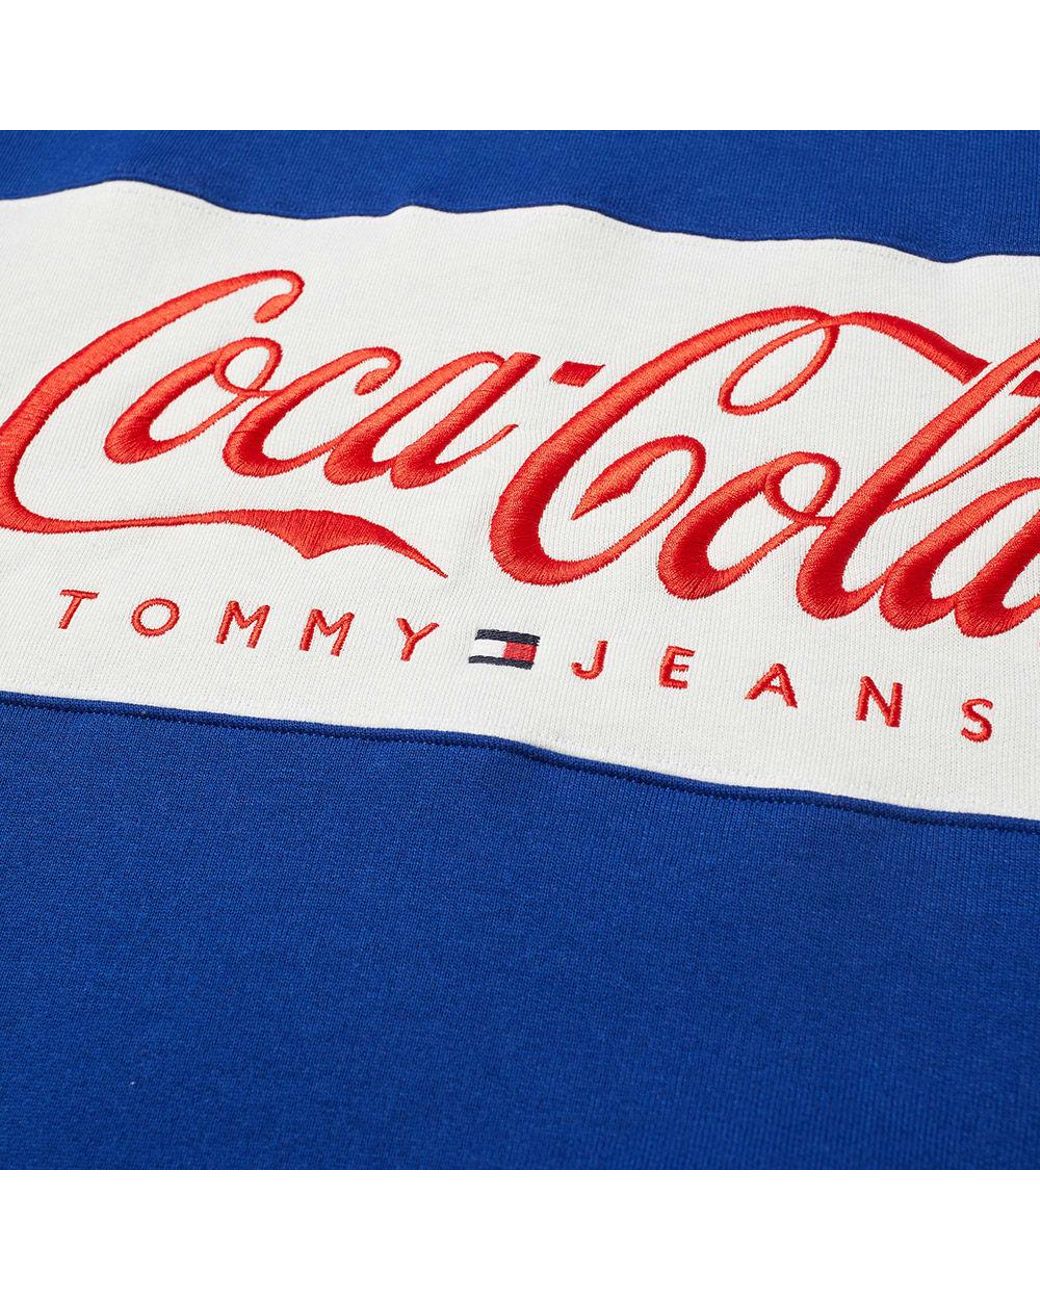 Tommy Hilfiger X Coca-cola Crew Sweat in Blue for Men | Lyst Canada